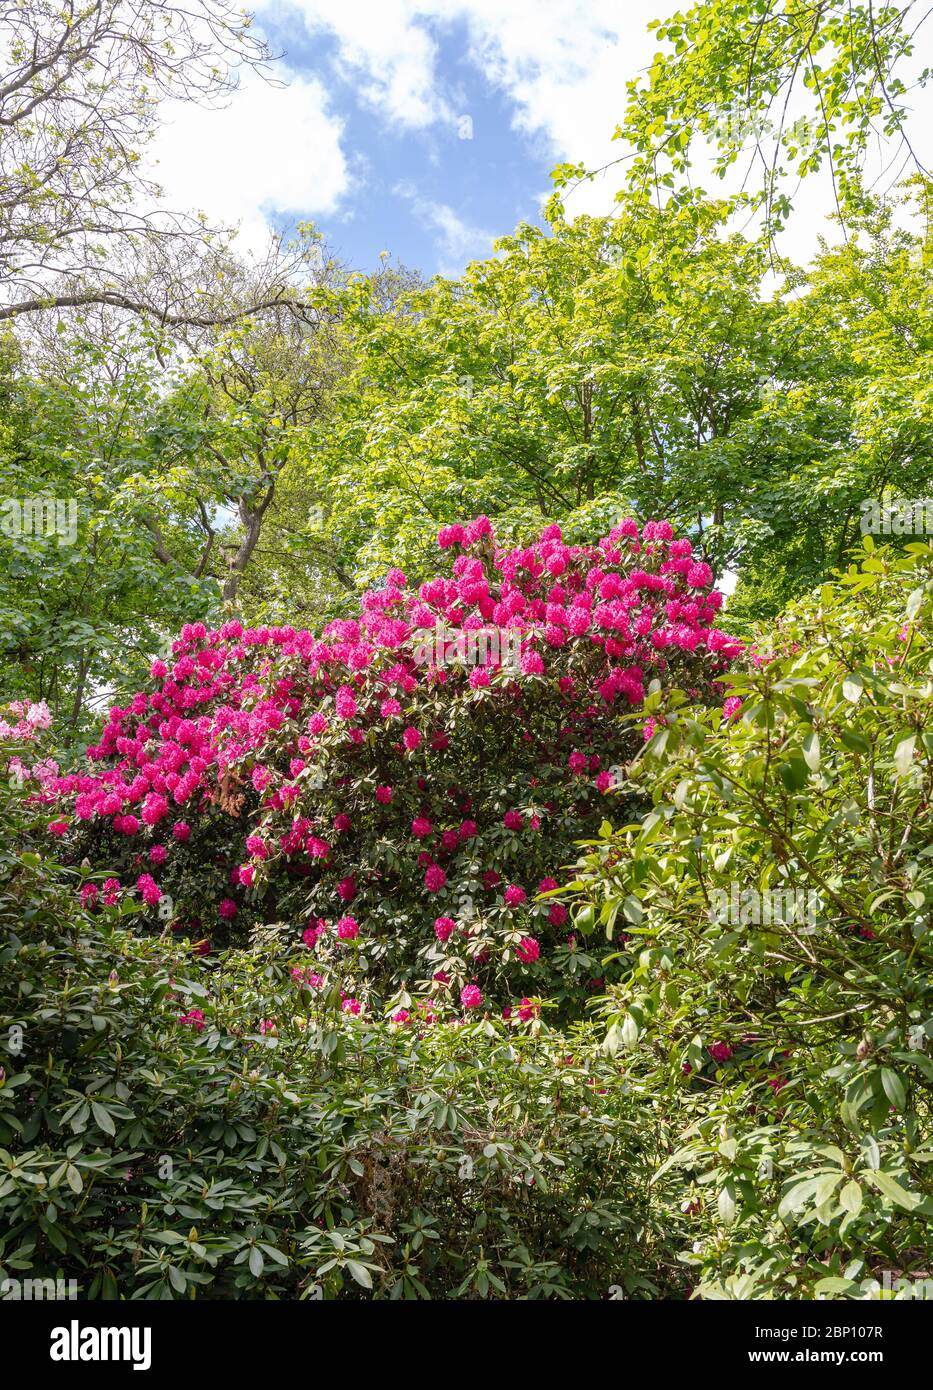 Rhododendron shrub in a woodland setting.  Blooming magenta flowers lie hight up amongst shrubs and trees. A blue sky with clouds is above. Stock Photo